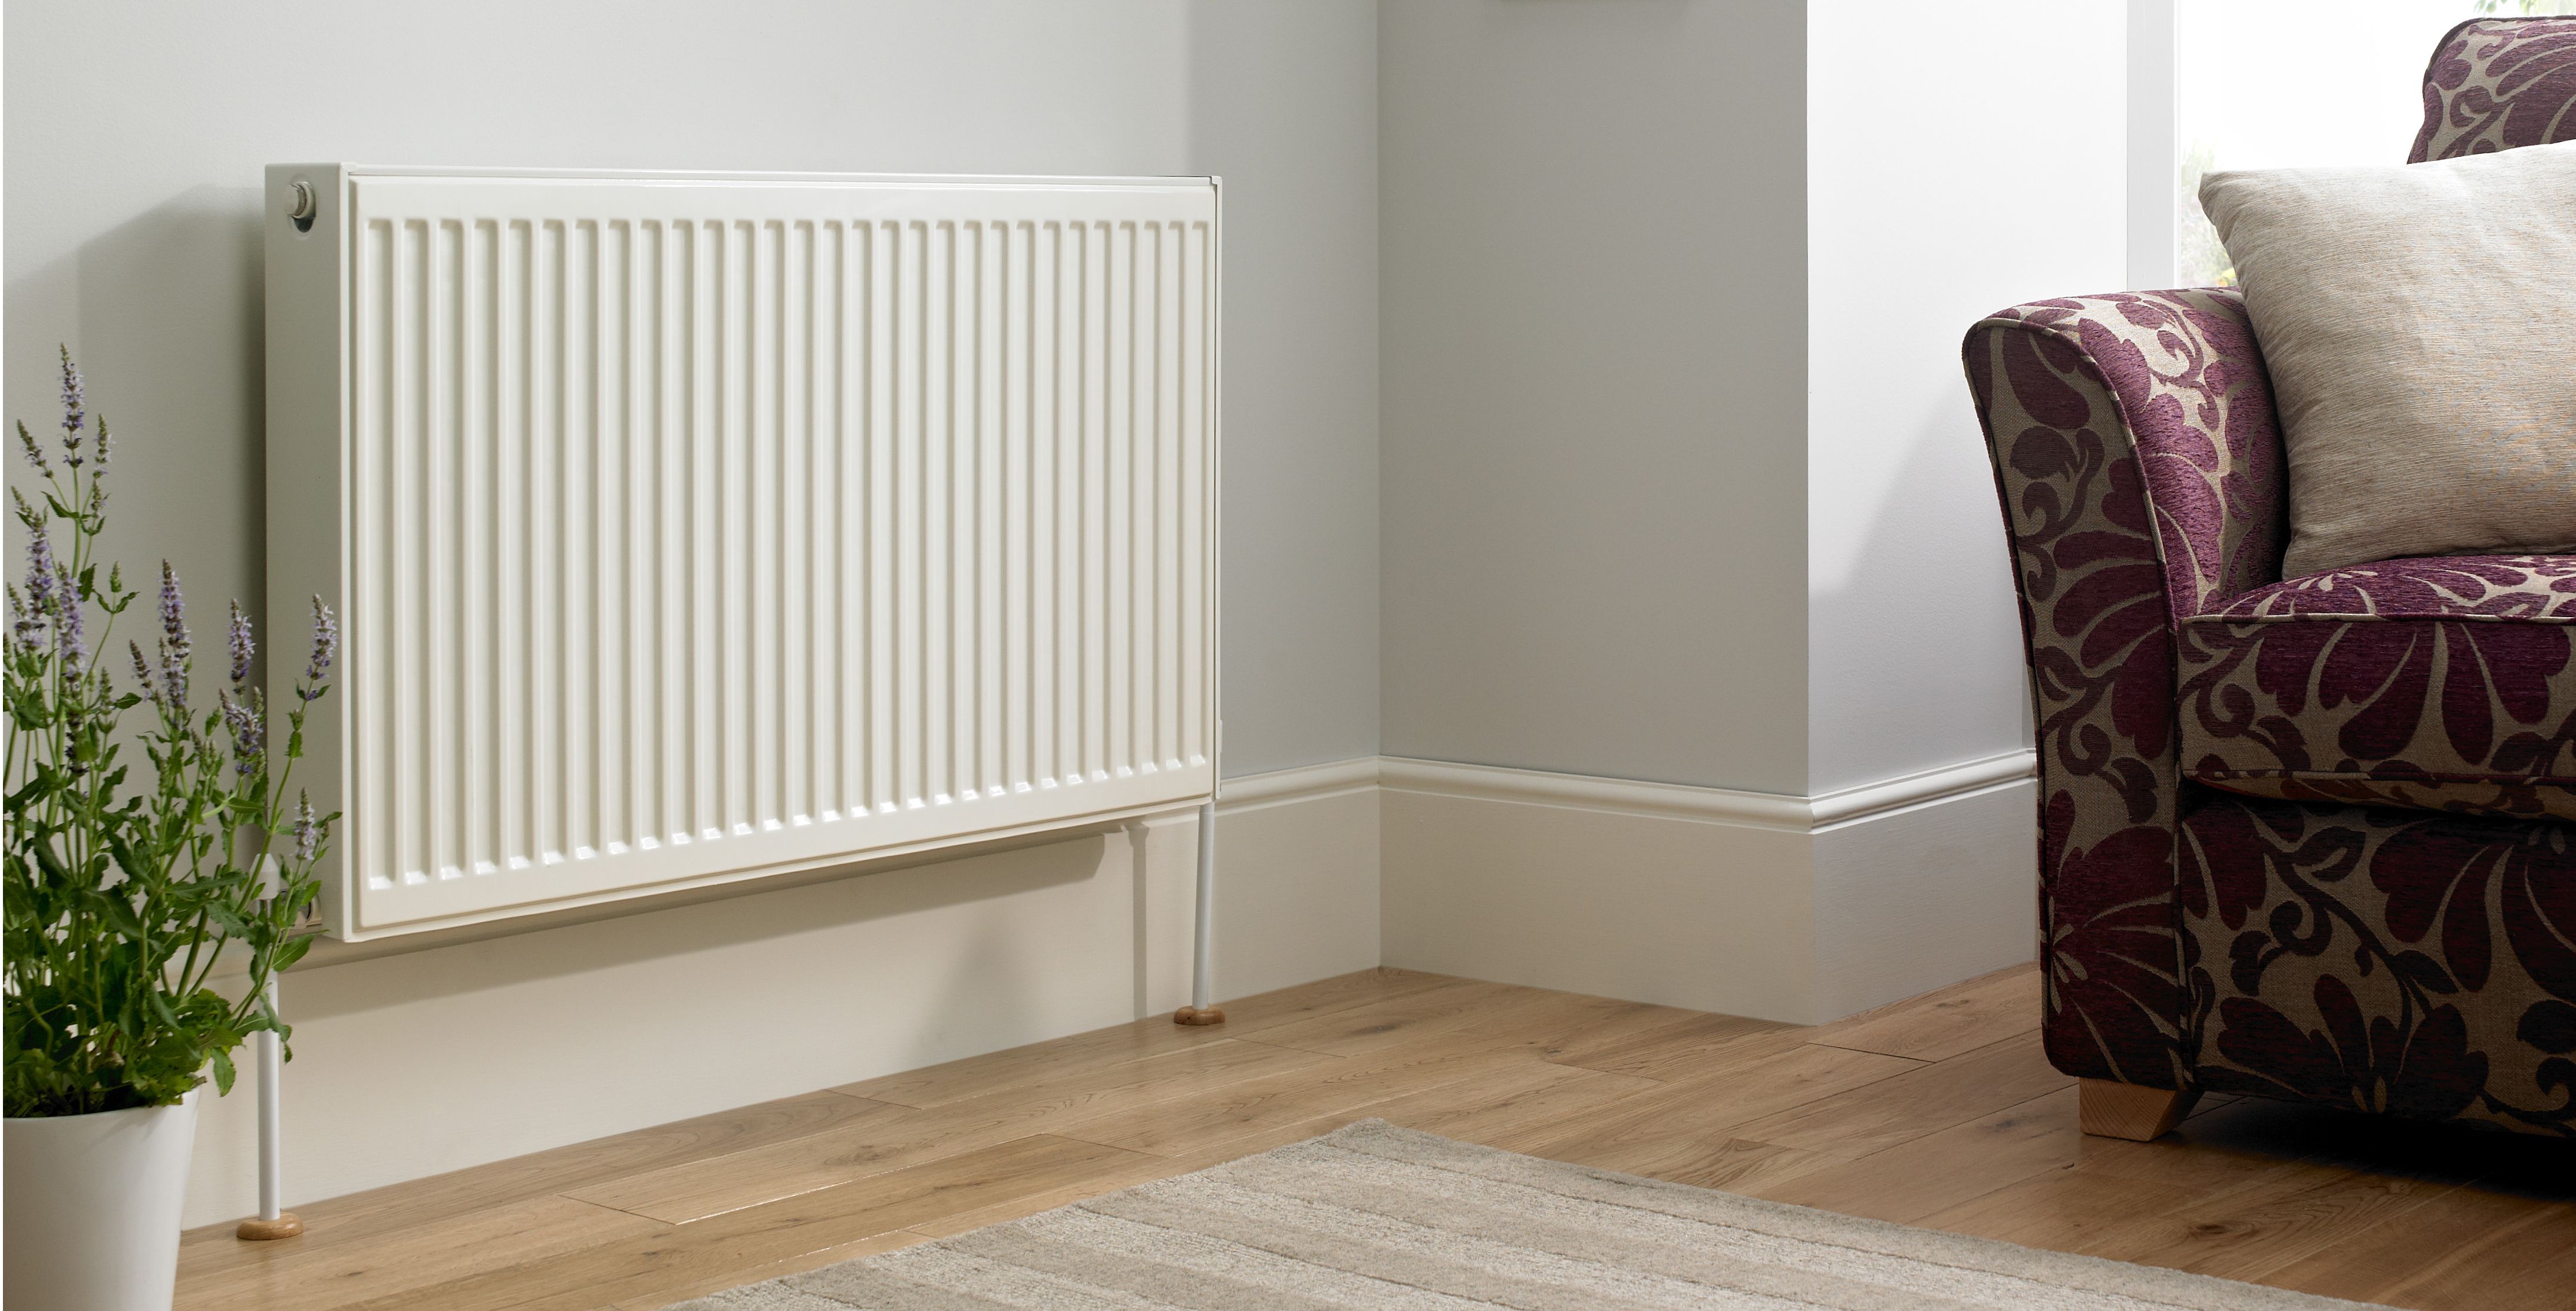 How to fix problems with radiators | Ideas &amp; Advice | DIY ...